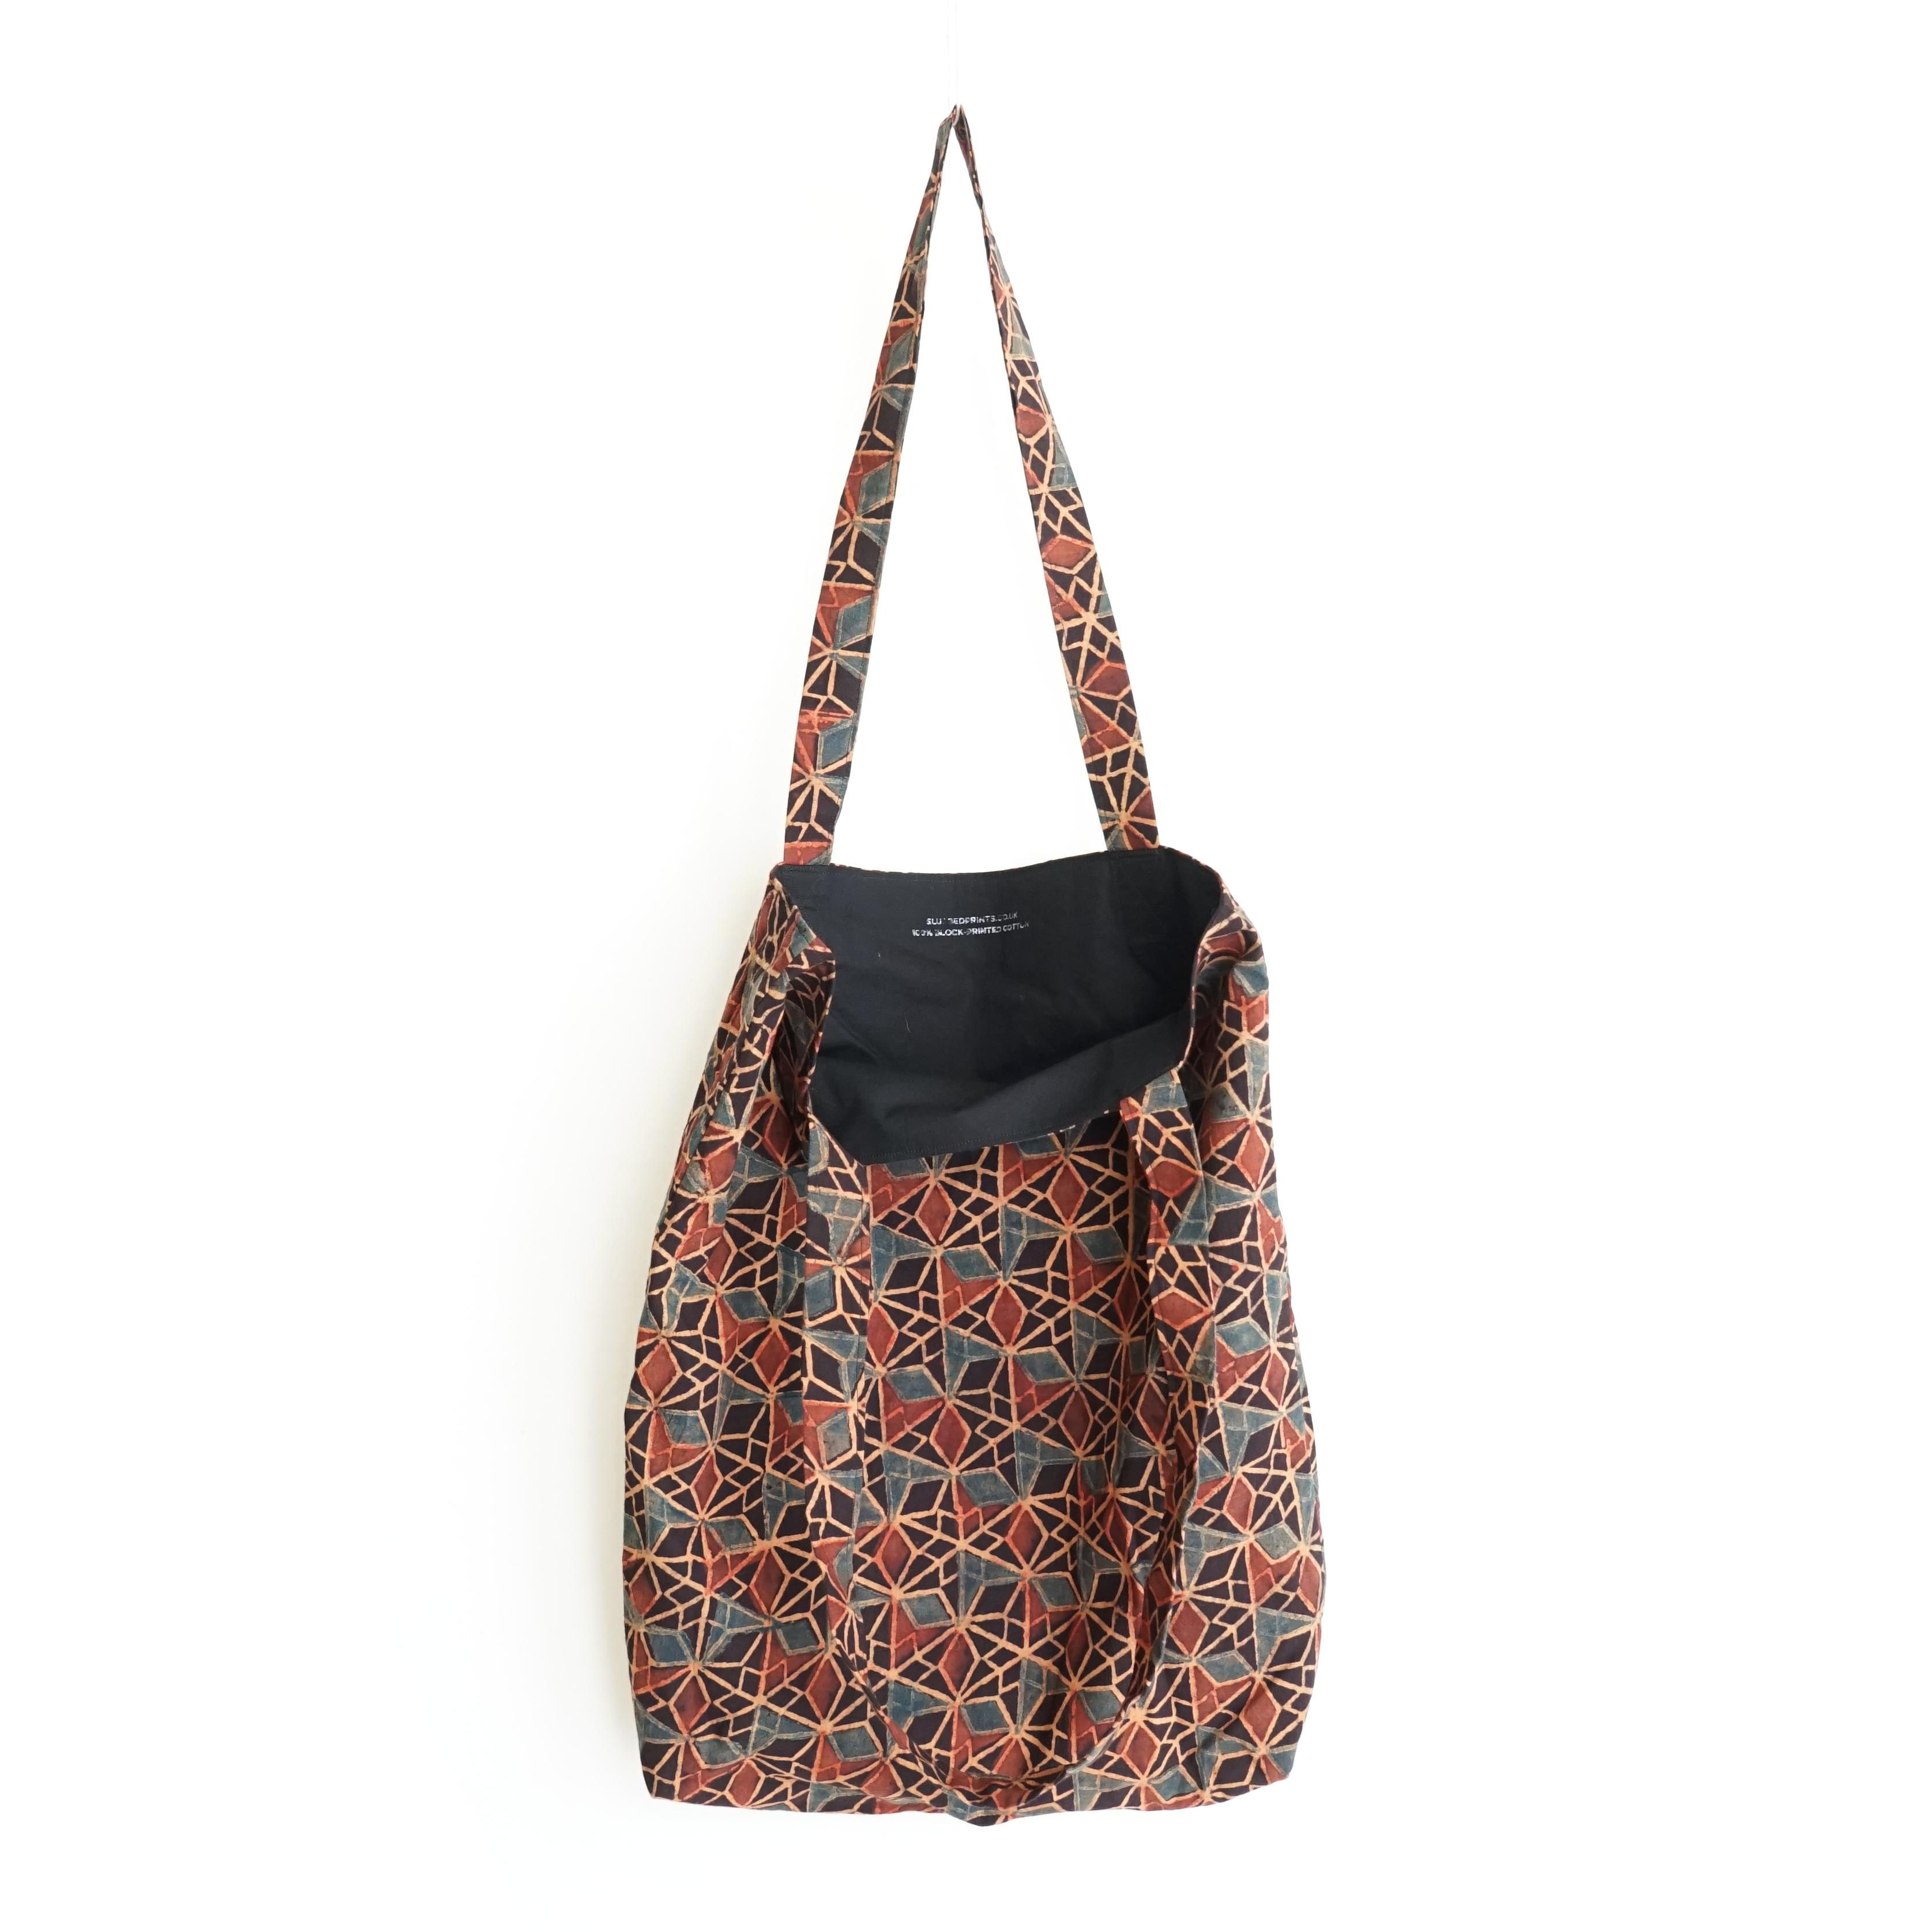 block printed cotton tote bag, black, red ochre blue wing design, natural dye, lined with black cotton, open